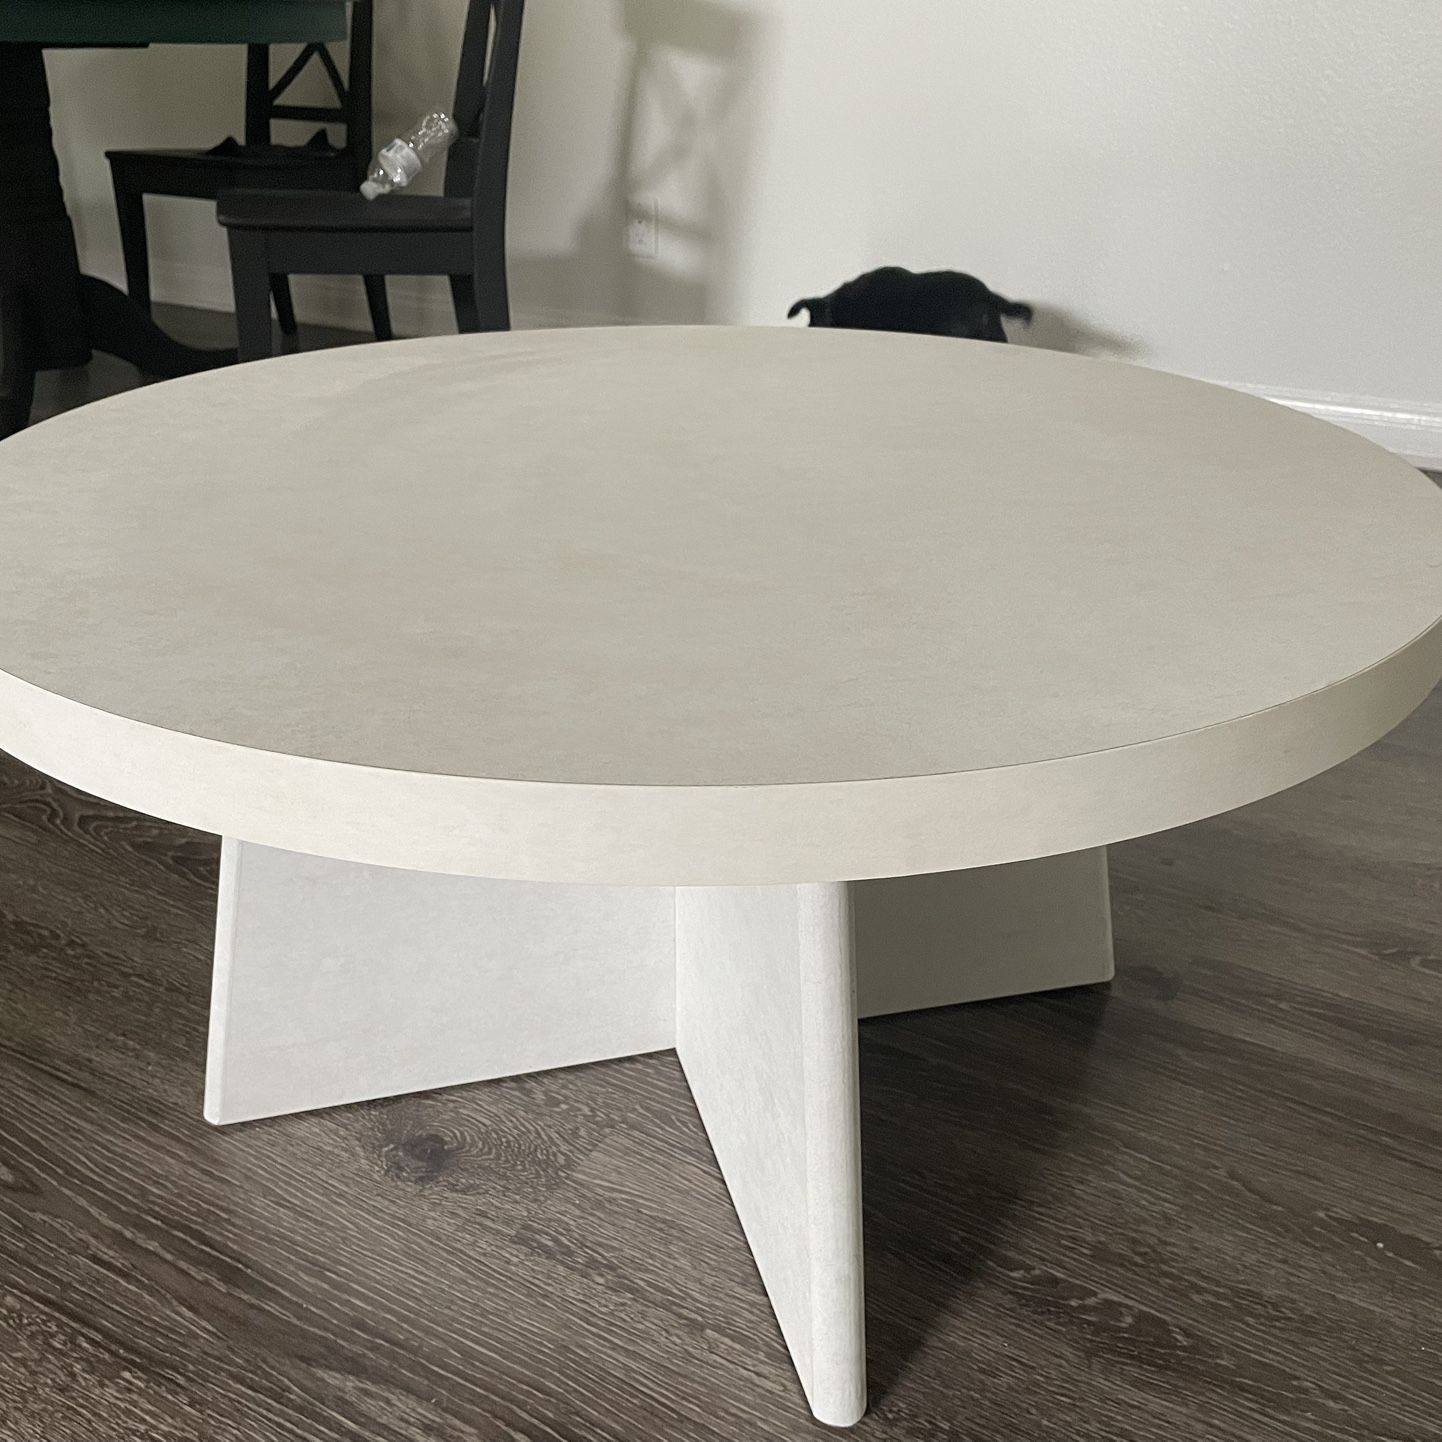 Queer Eye Liam Round Coffee Table For Sale In Huntington Beach, Ca – Offerup For Liam Round Plaster Coffee Tables (View 8 of 15)